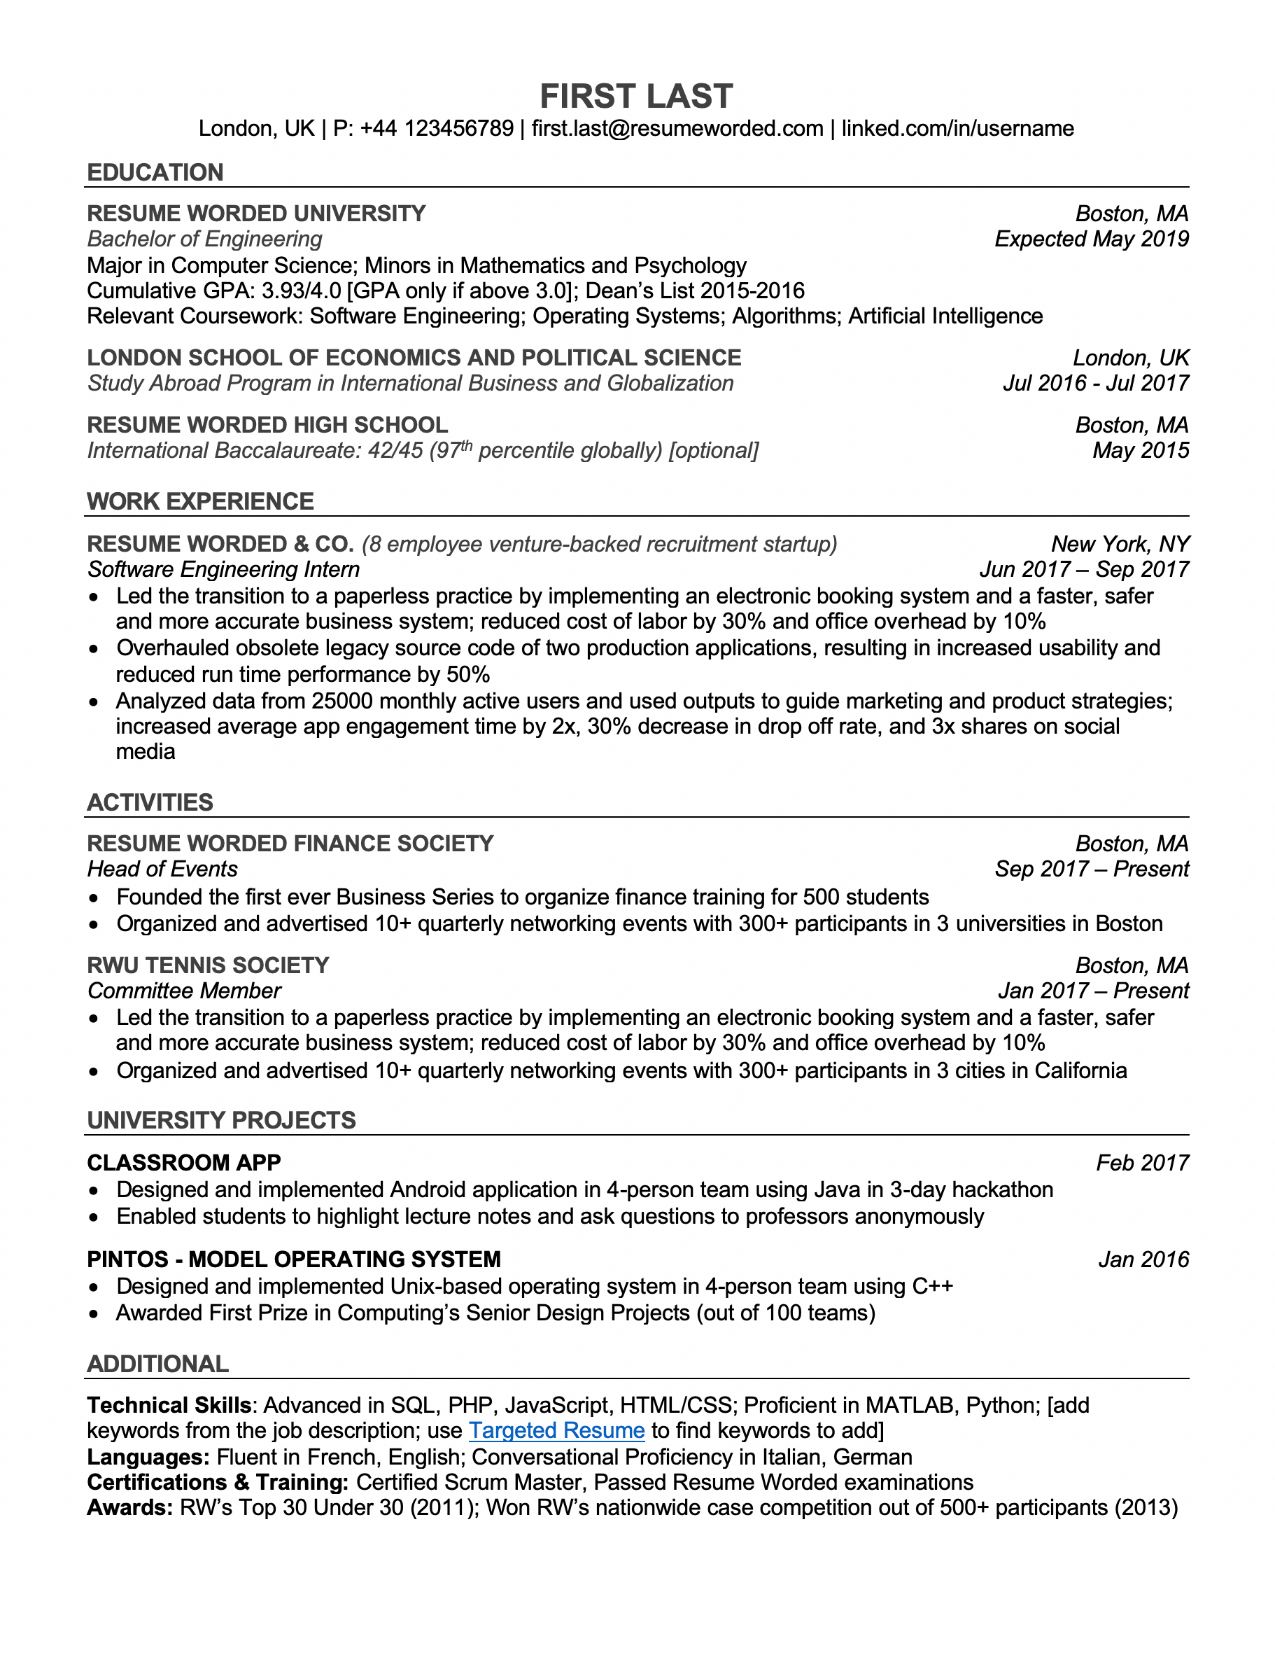 Professional ATS Resume Templates for Experienced Hires and College  Students or Grads, for free [Updated for 2020]